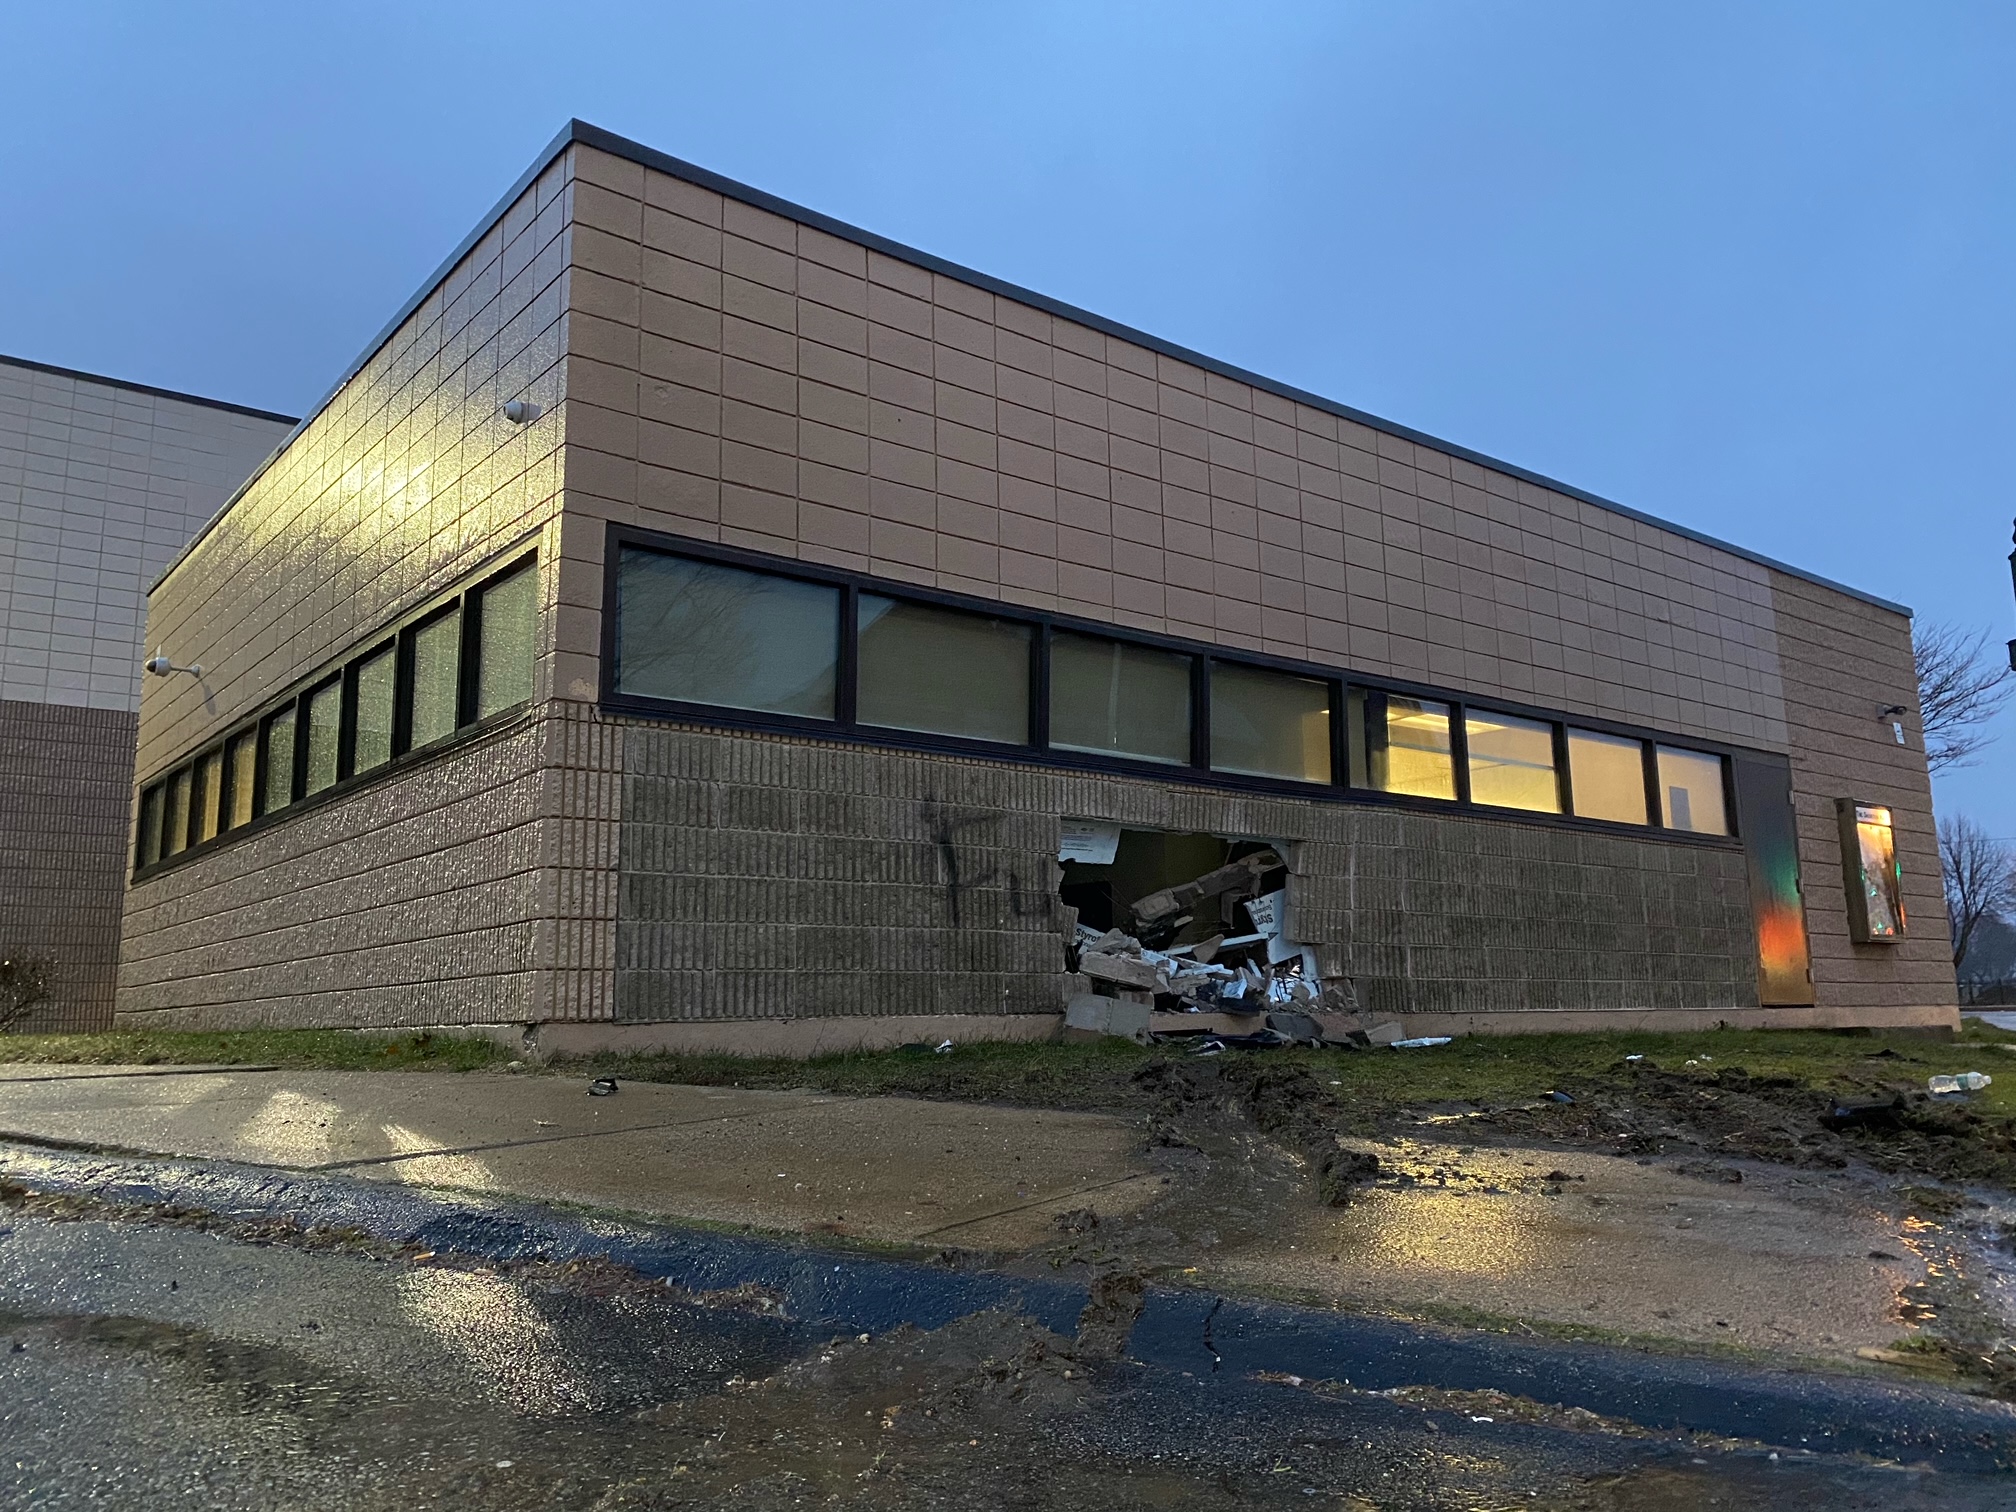 Car crash lead to hole in commercial building